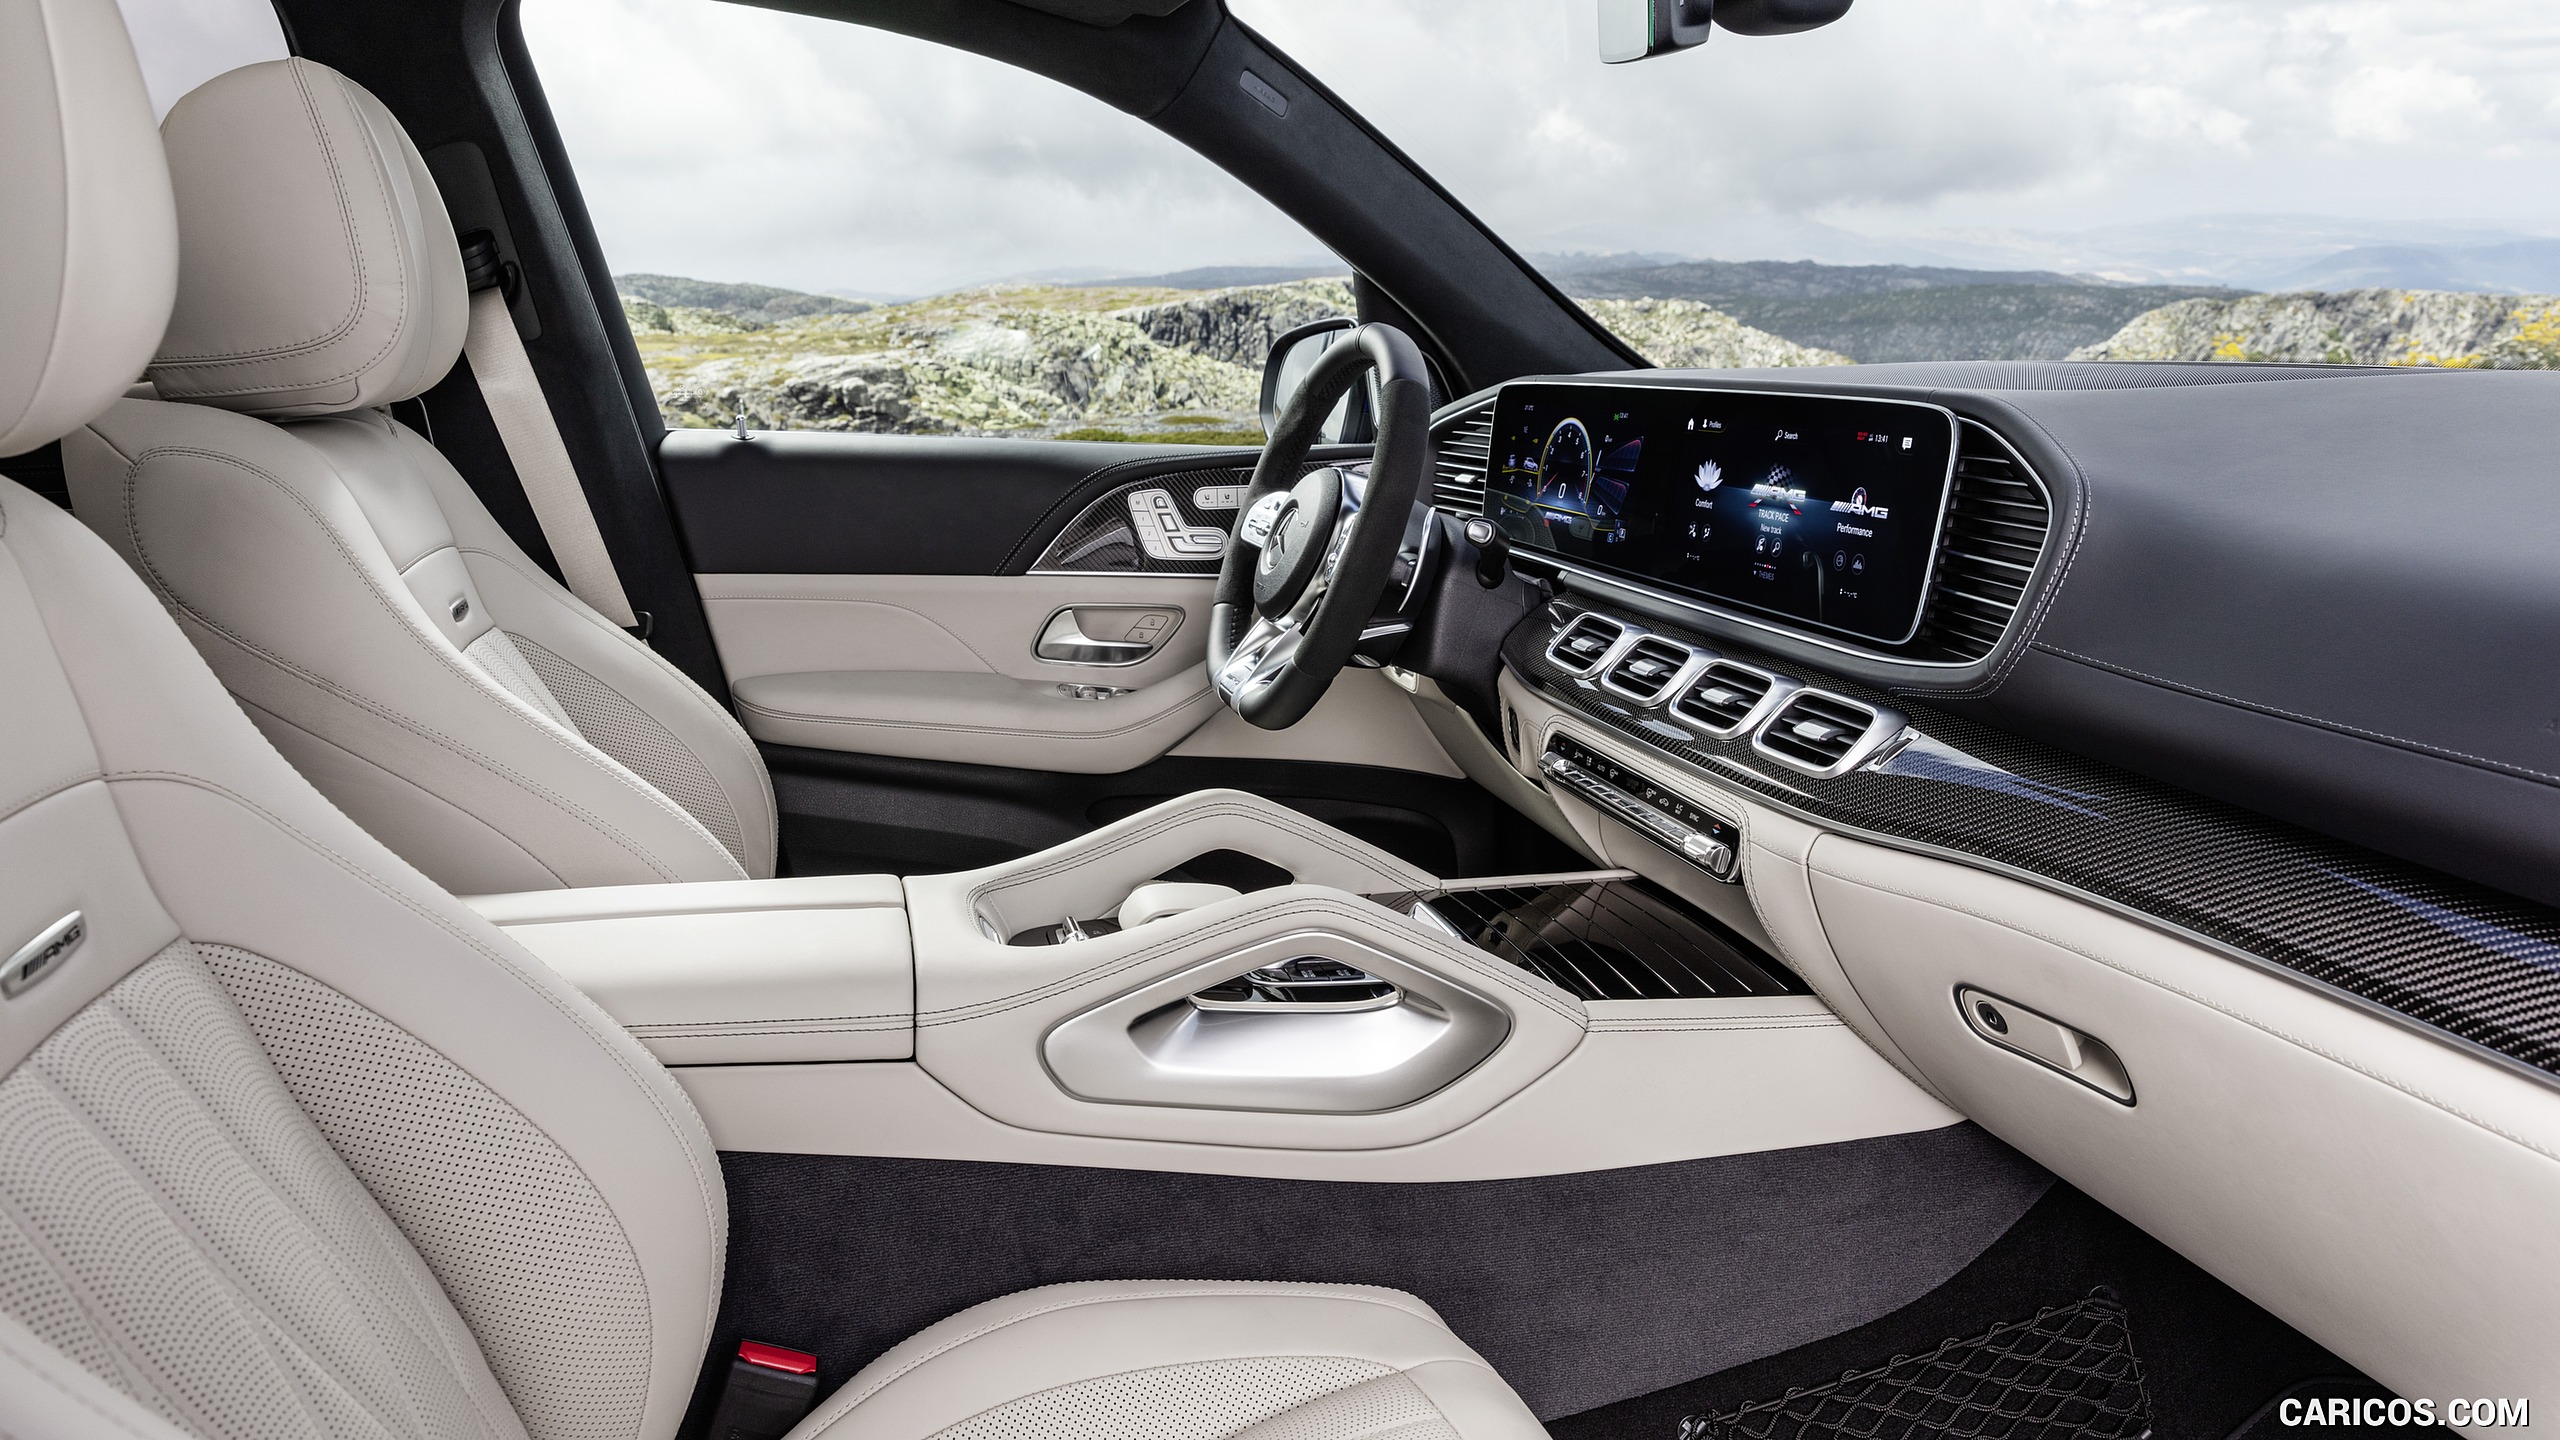 2021 Mercedes-AMG GLE 63 S 4MATIC - Interior, #28 of 187